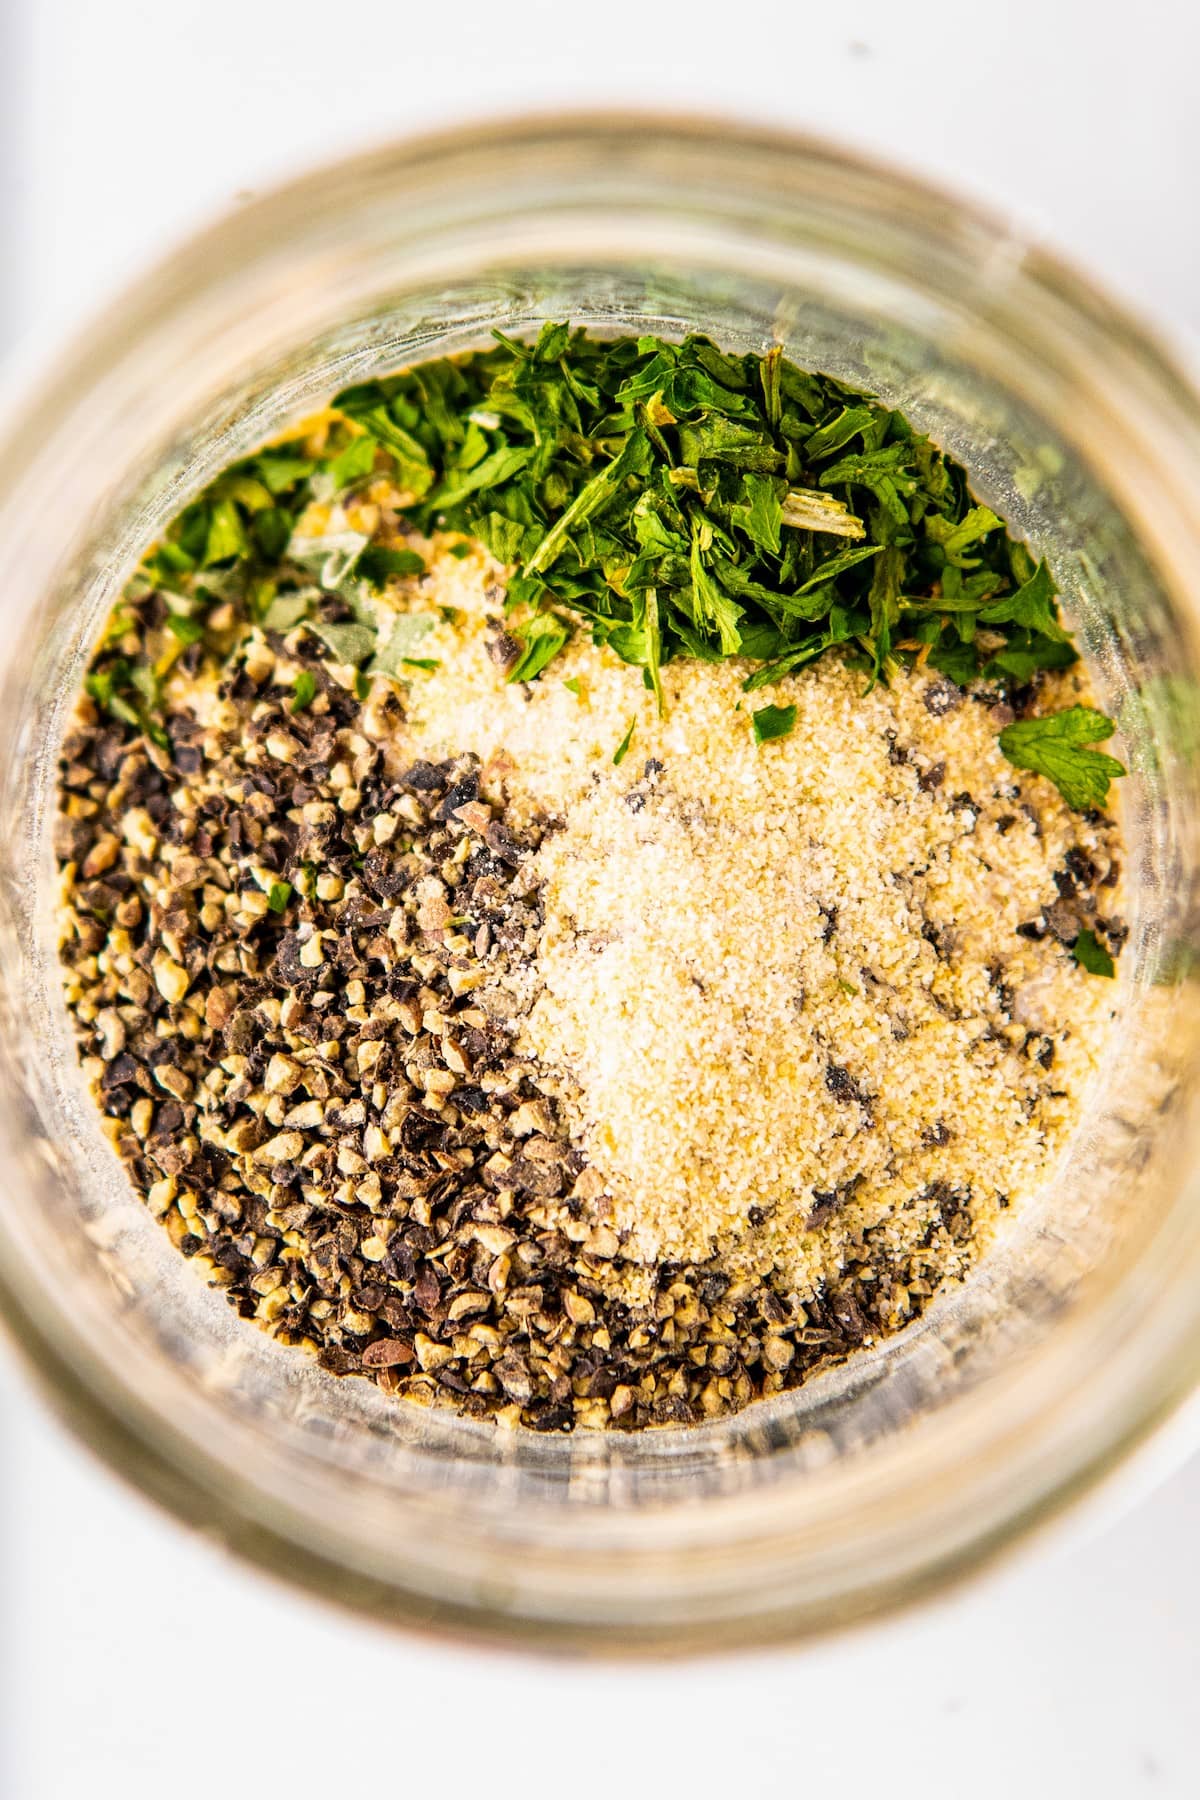 Overhead view of unmixed herbs and spices in a jar